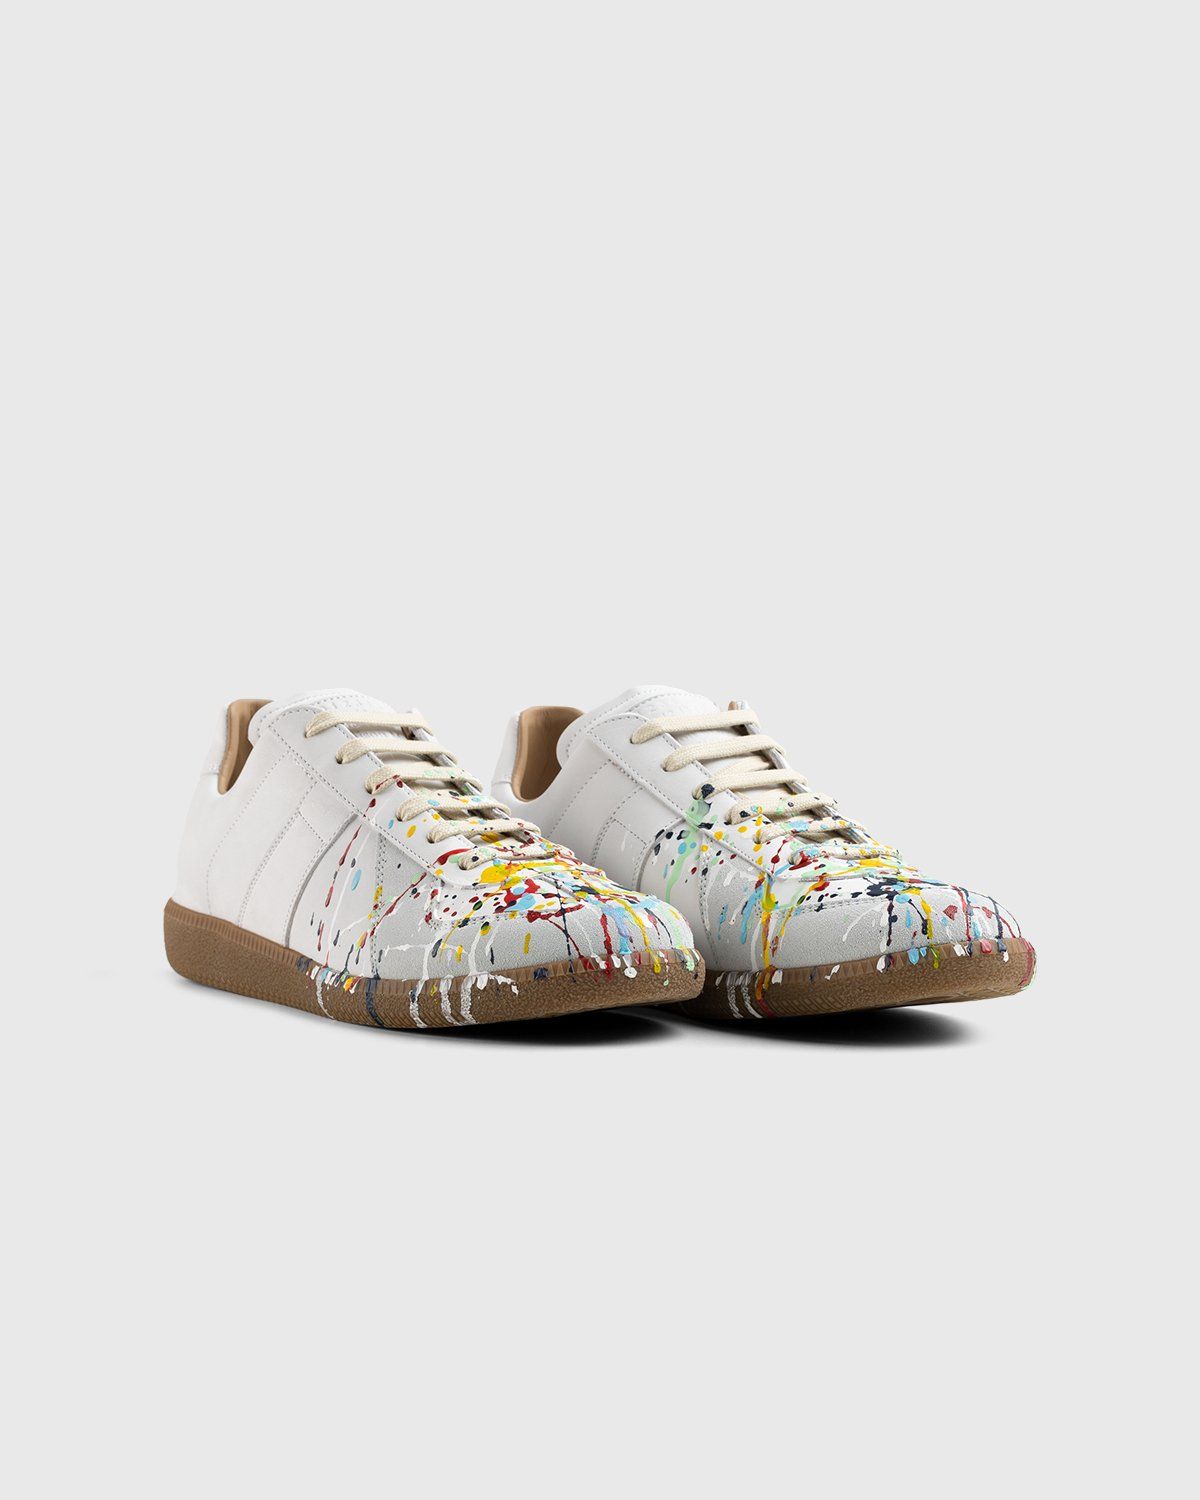 Maison Margiela – Replica Paint Drop Sneakers White - Low Top Sneakers - White - Image 2